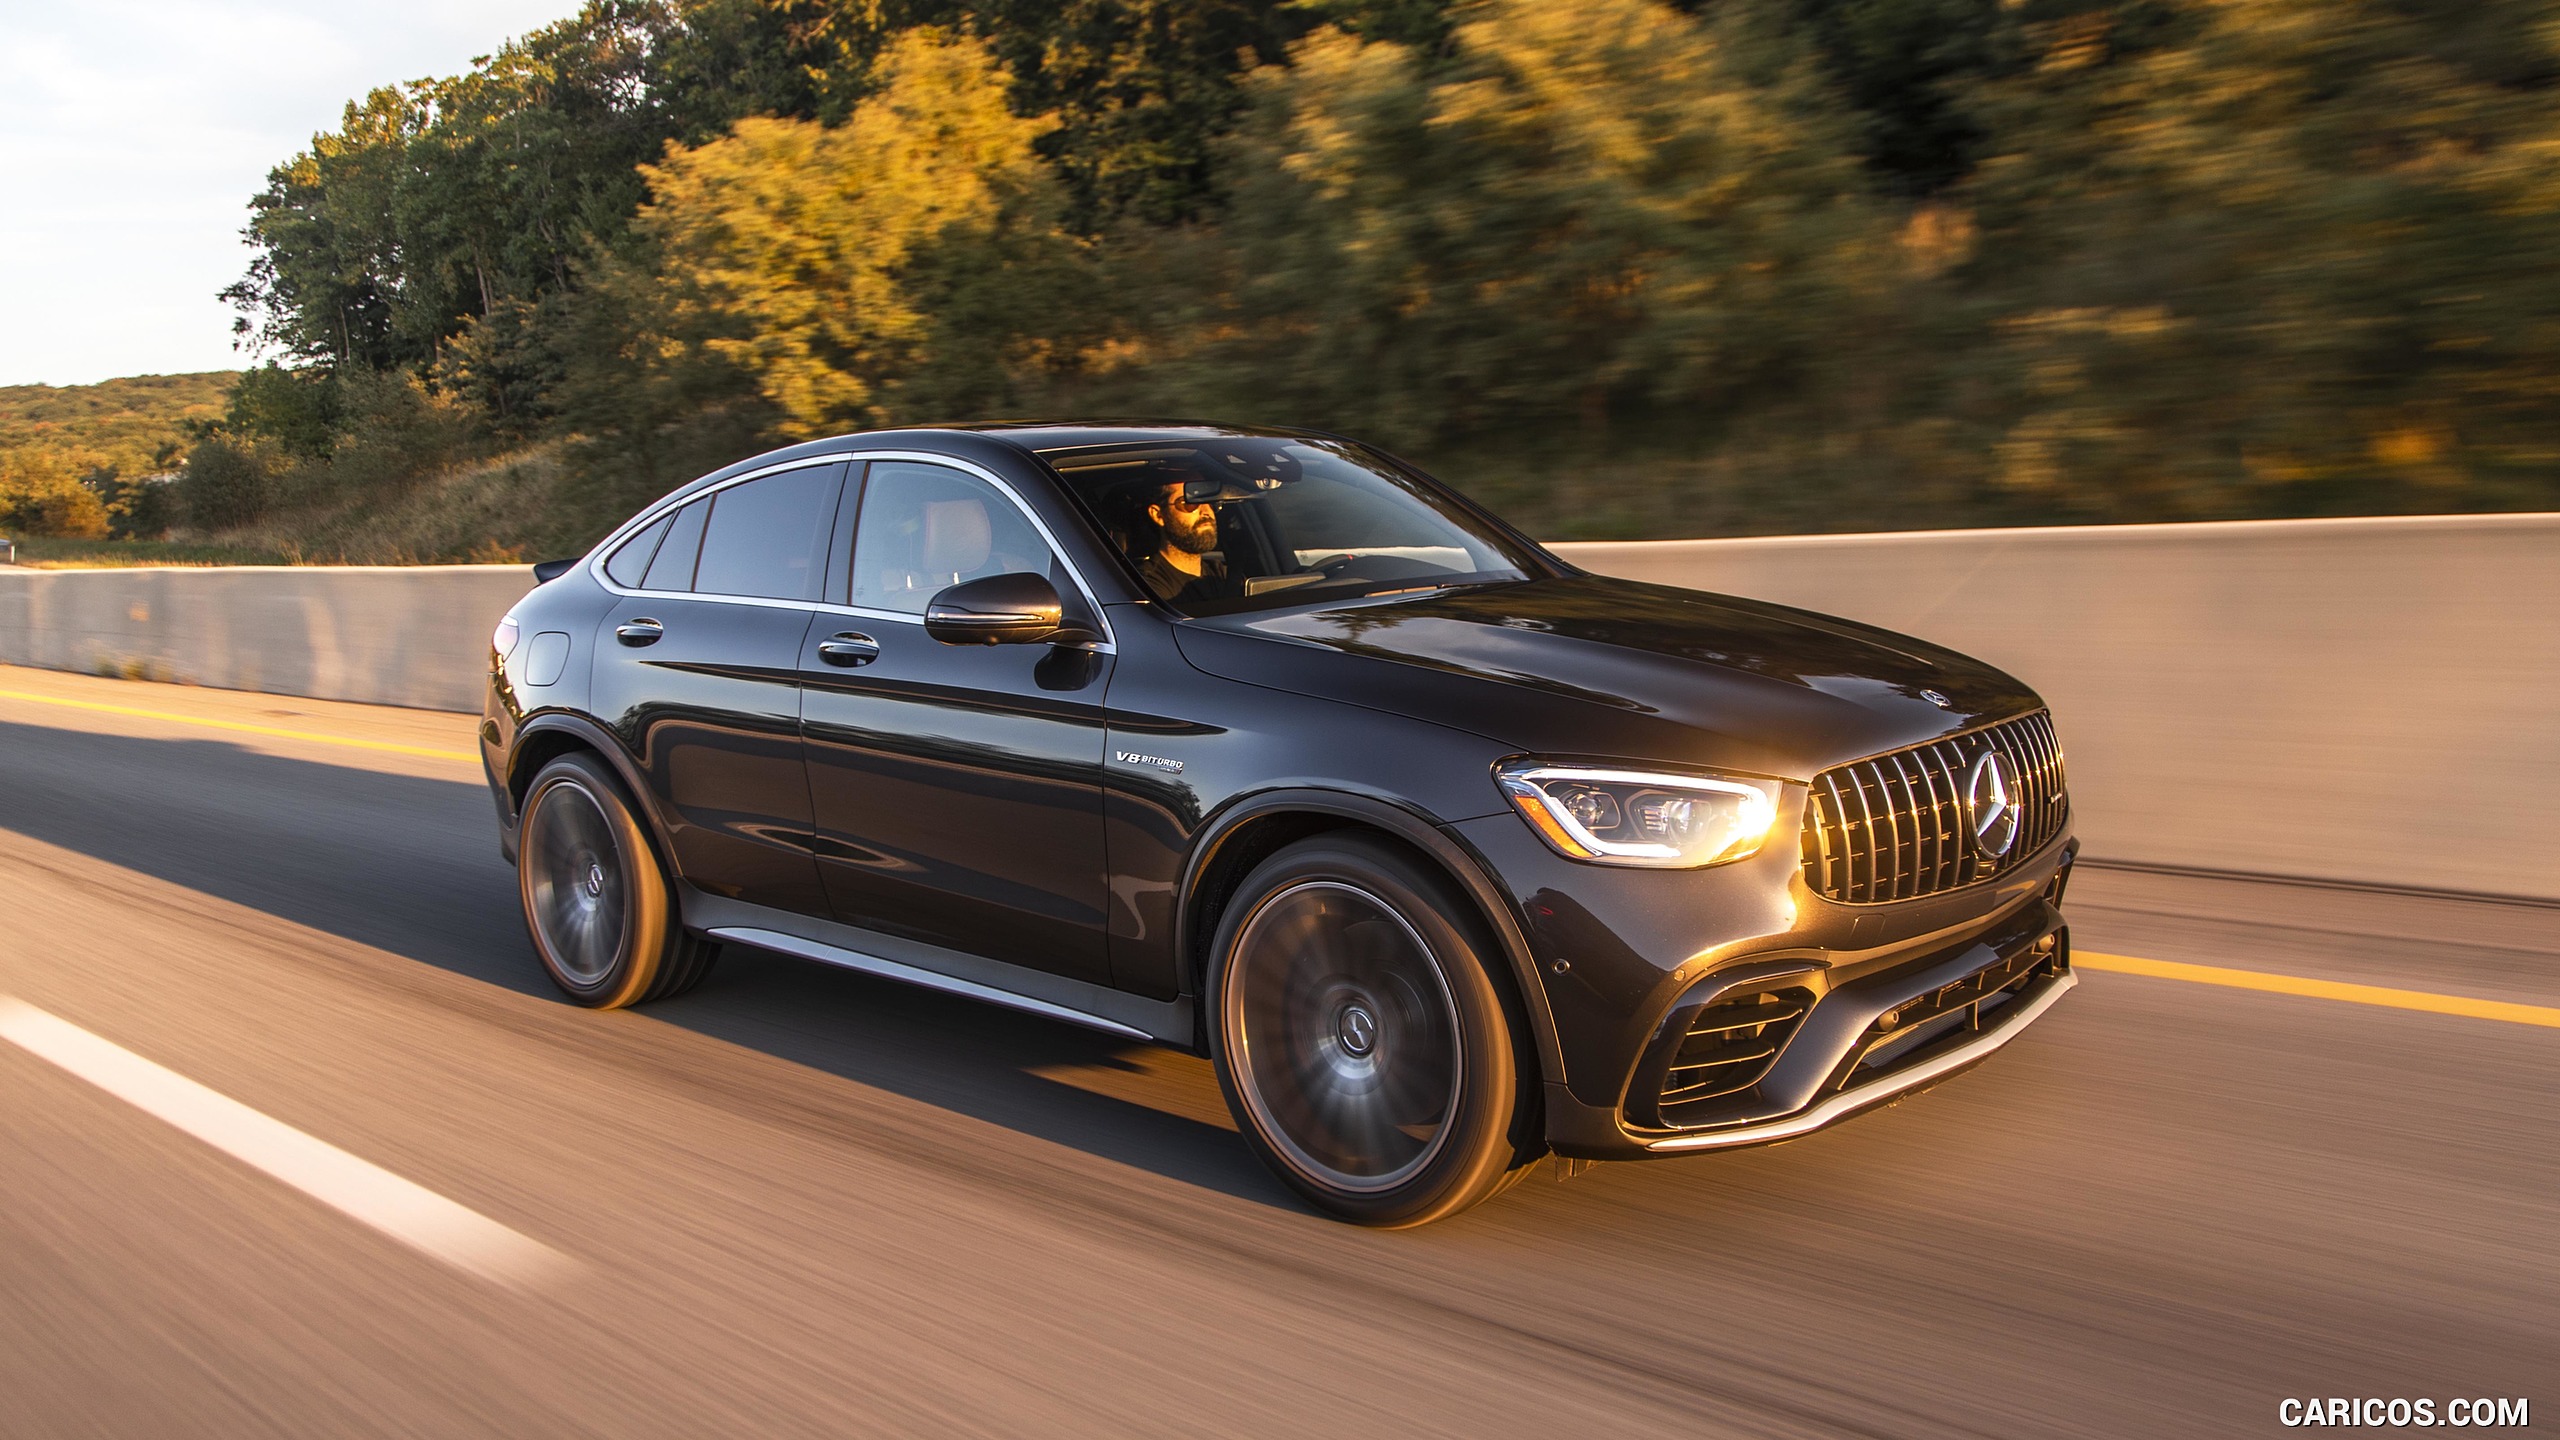 2020 Mercedes-AMG GLC 63 S Coupe (US-Spec) - Front Three-Quarter, #39 of 102